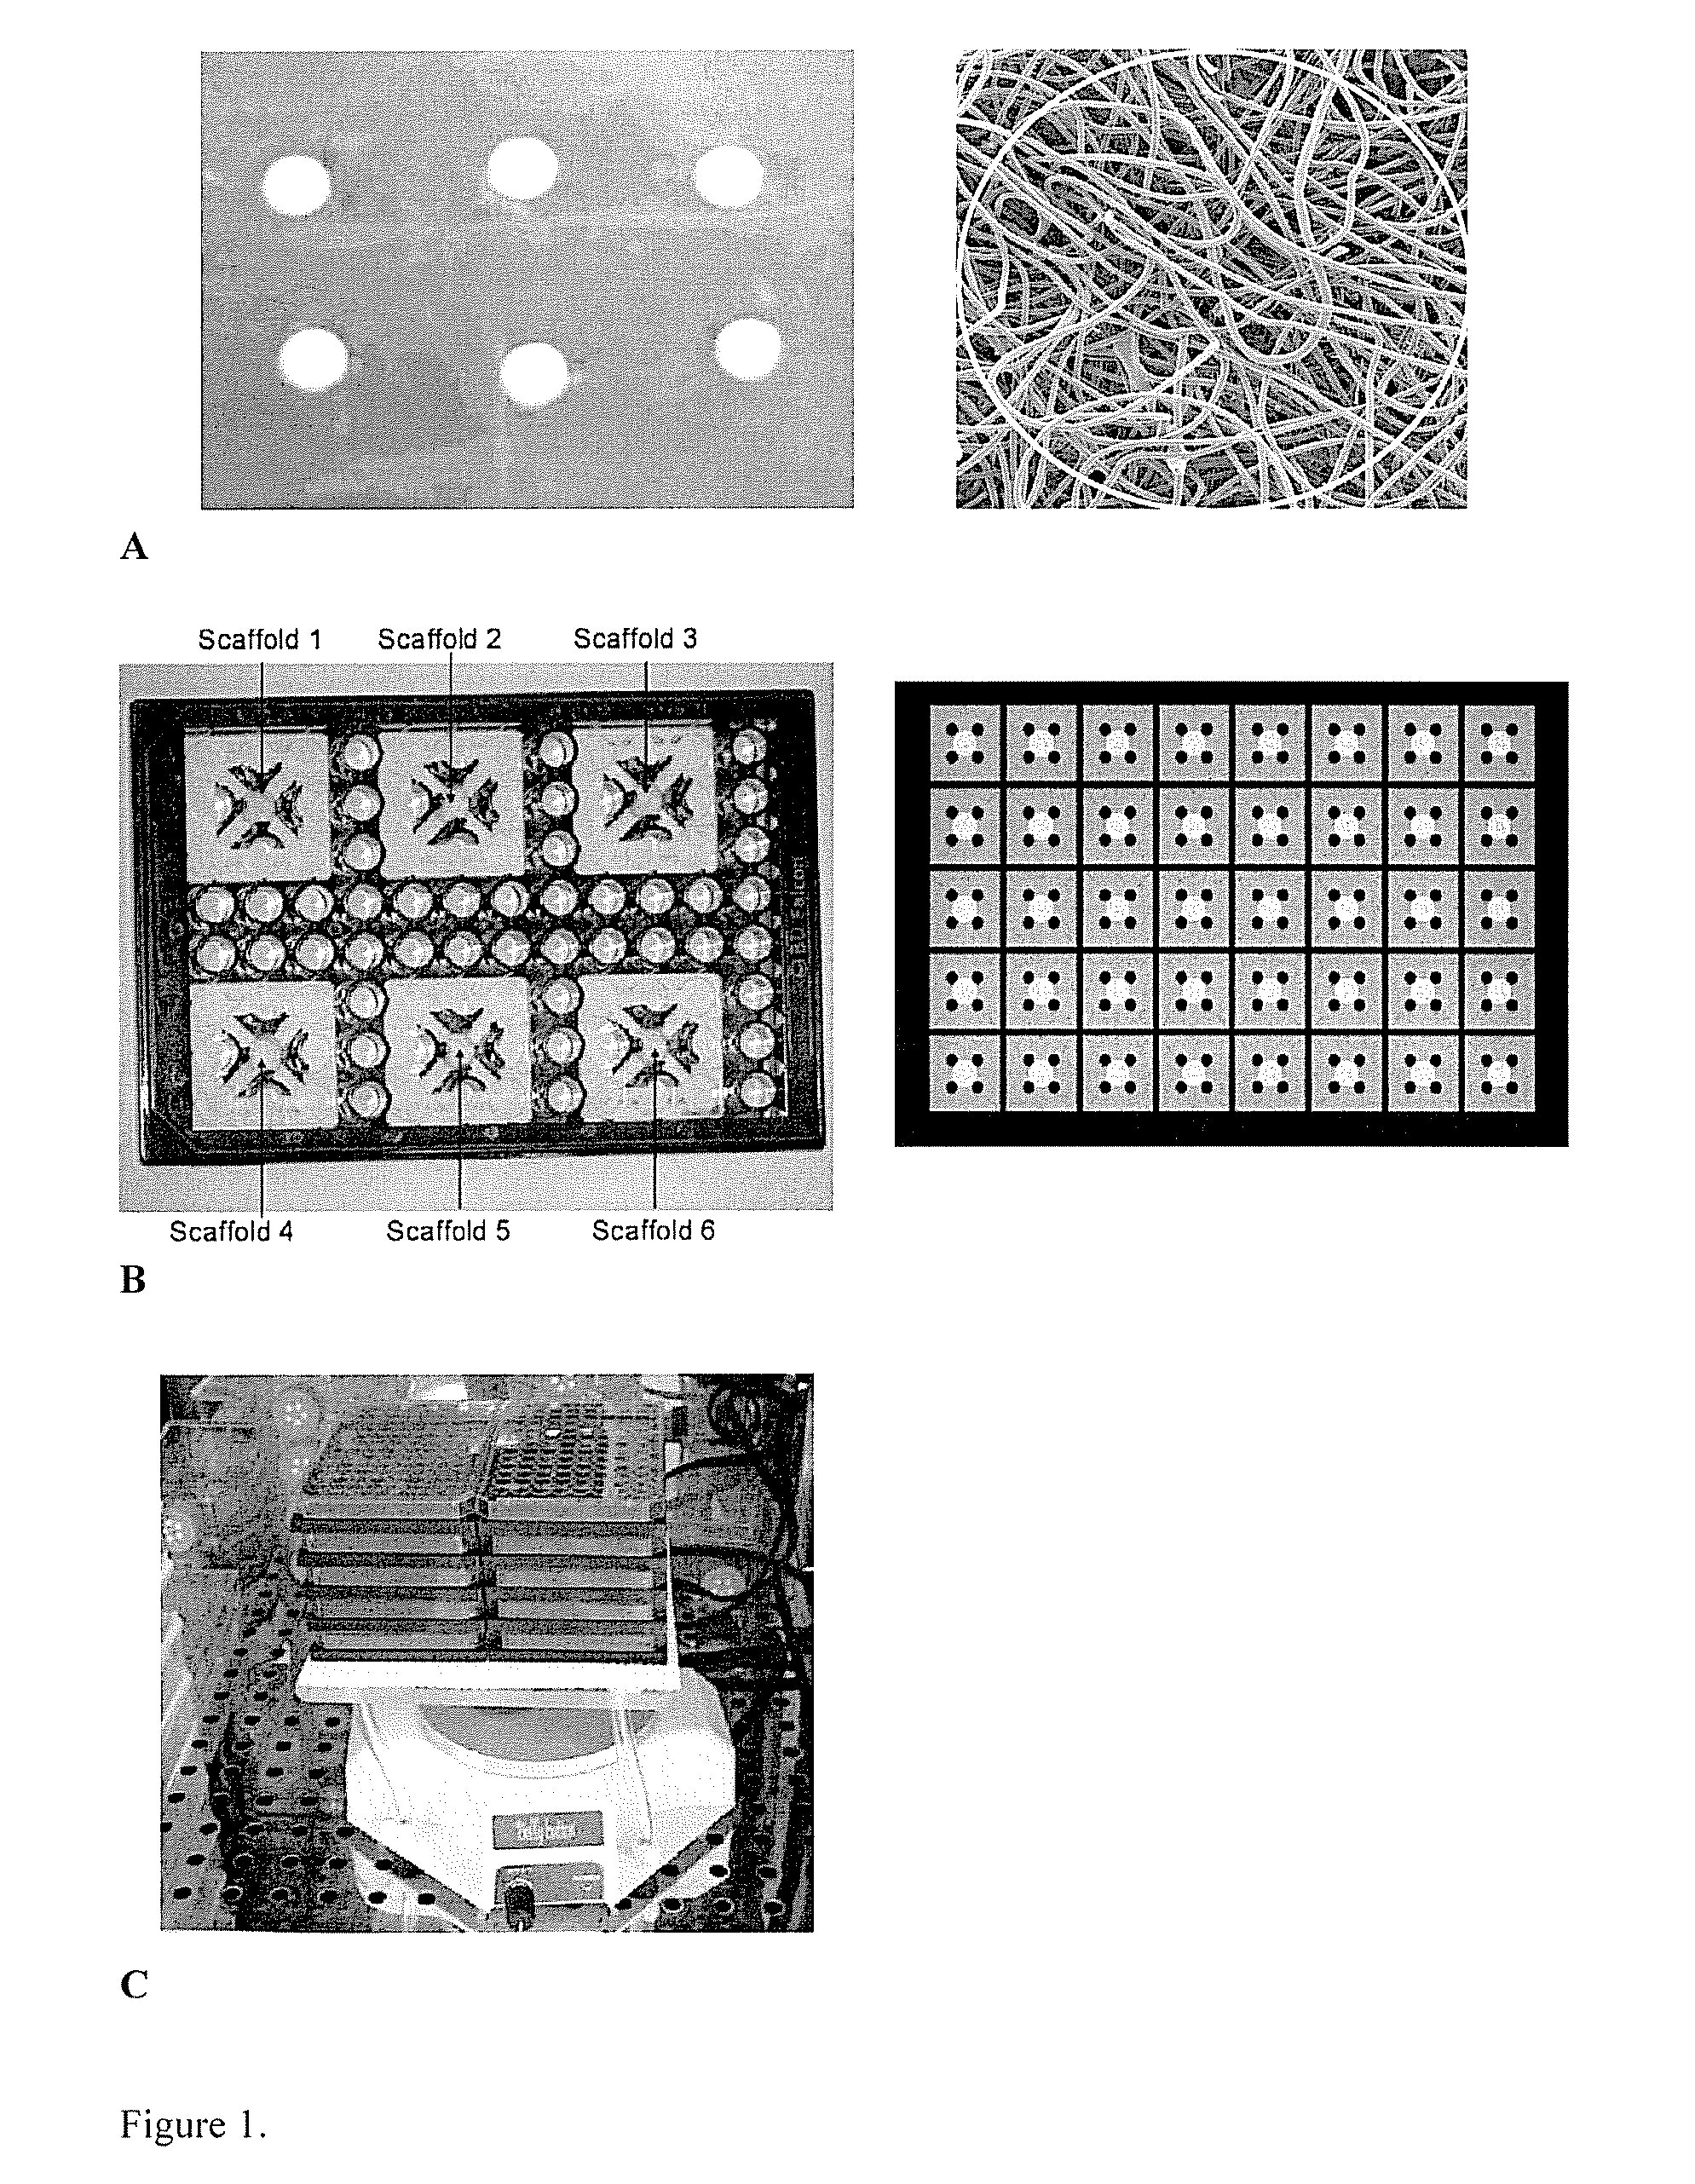 Materials and methods for cell-based assays